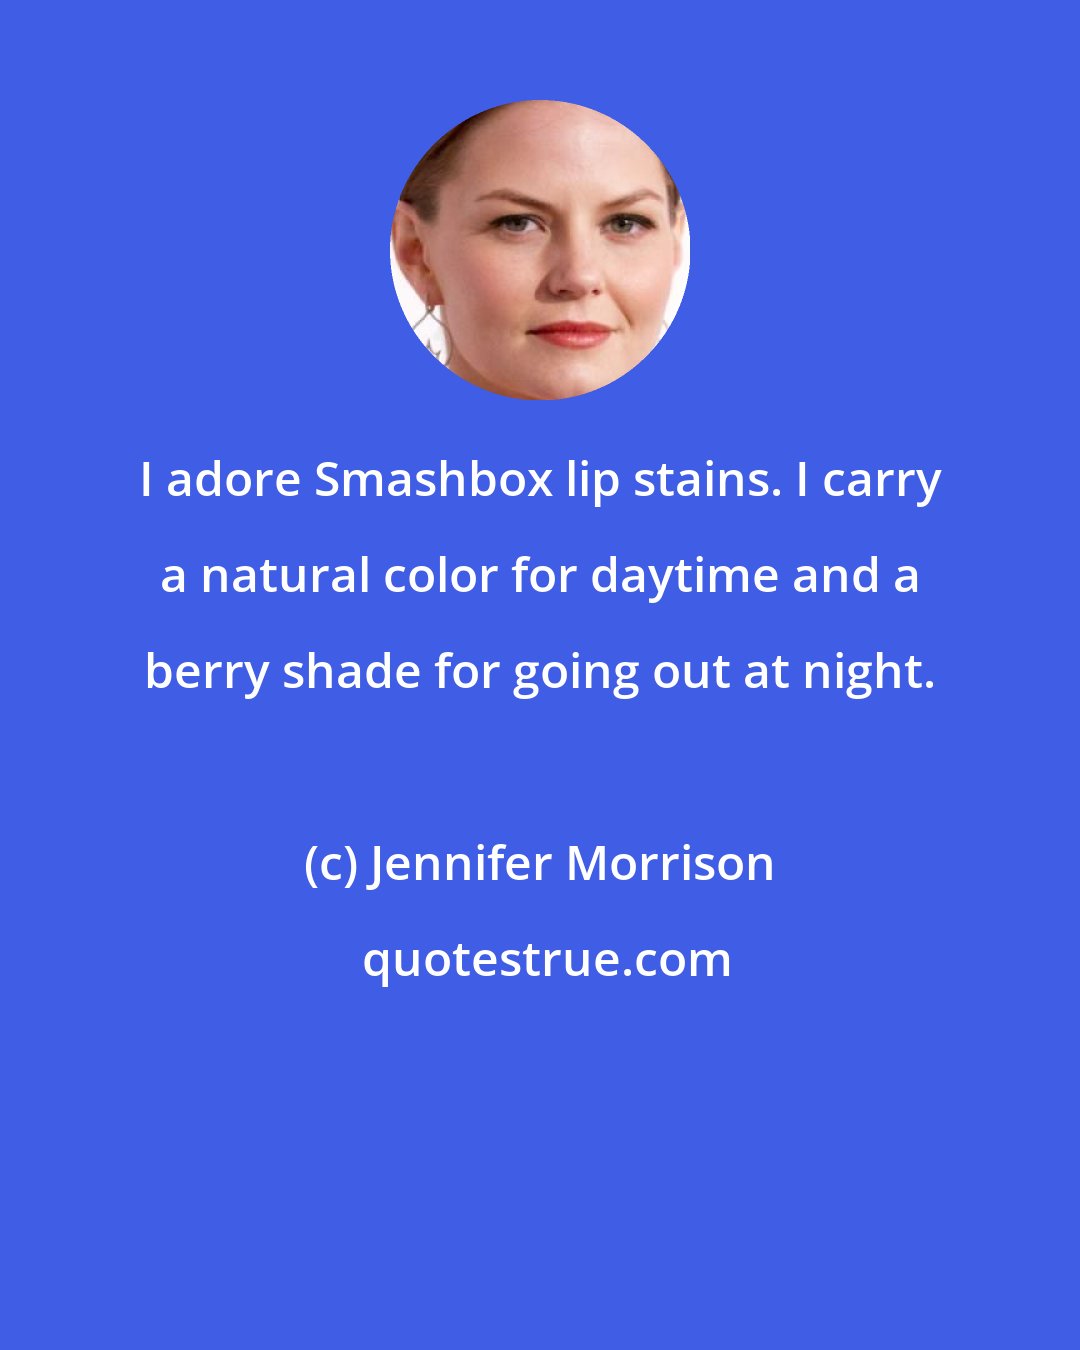 Jennifer Morrison: I adore Smashbox lip stains. I carry a natural color for daytime and a berry shade for going out at night.